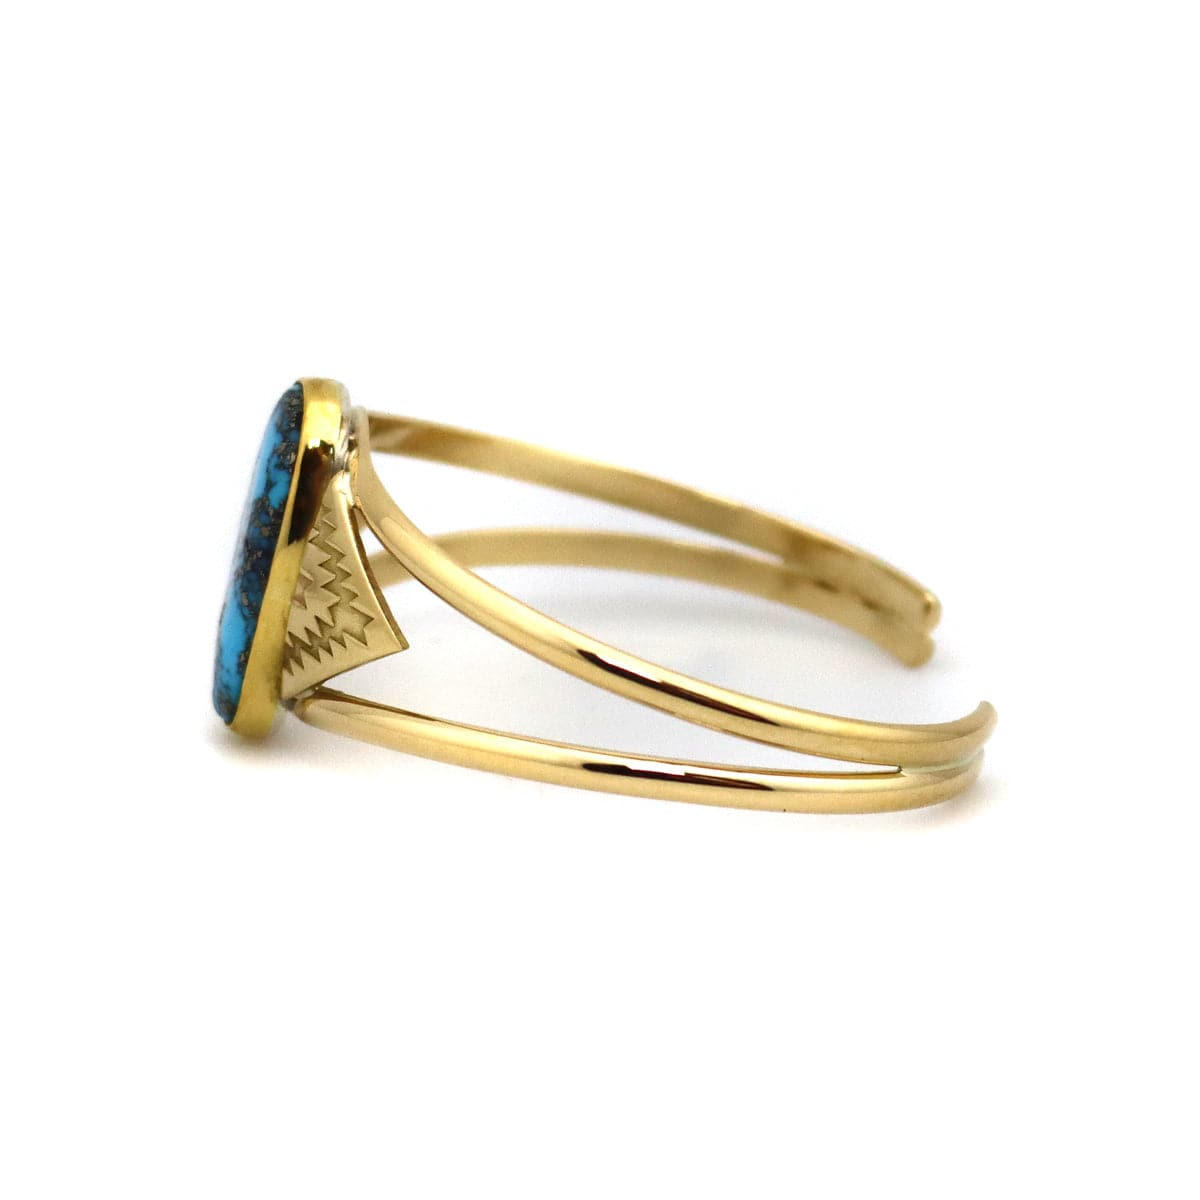 Mark Sublette Collection - Featuring Sam Patania Morenci Turquoise and 18K Gold Bracelet, size 6.75 (J13331) 1
